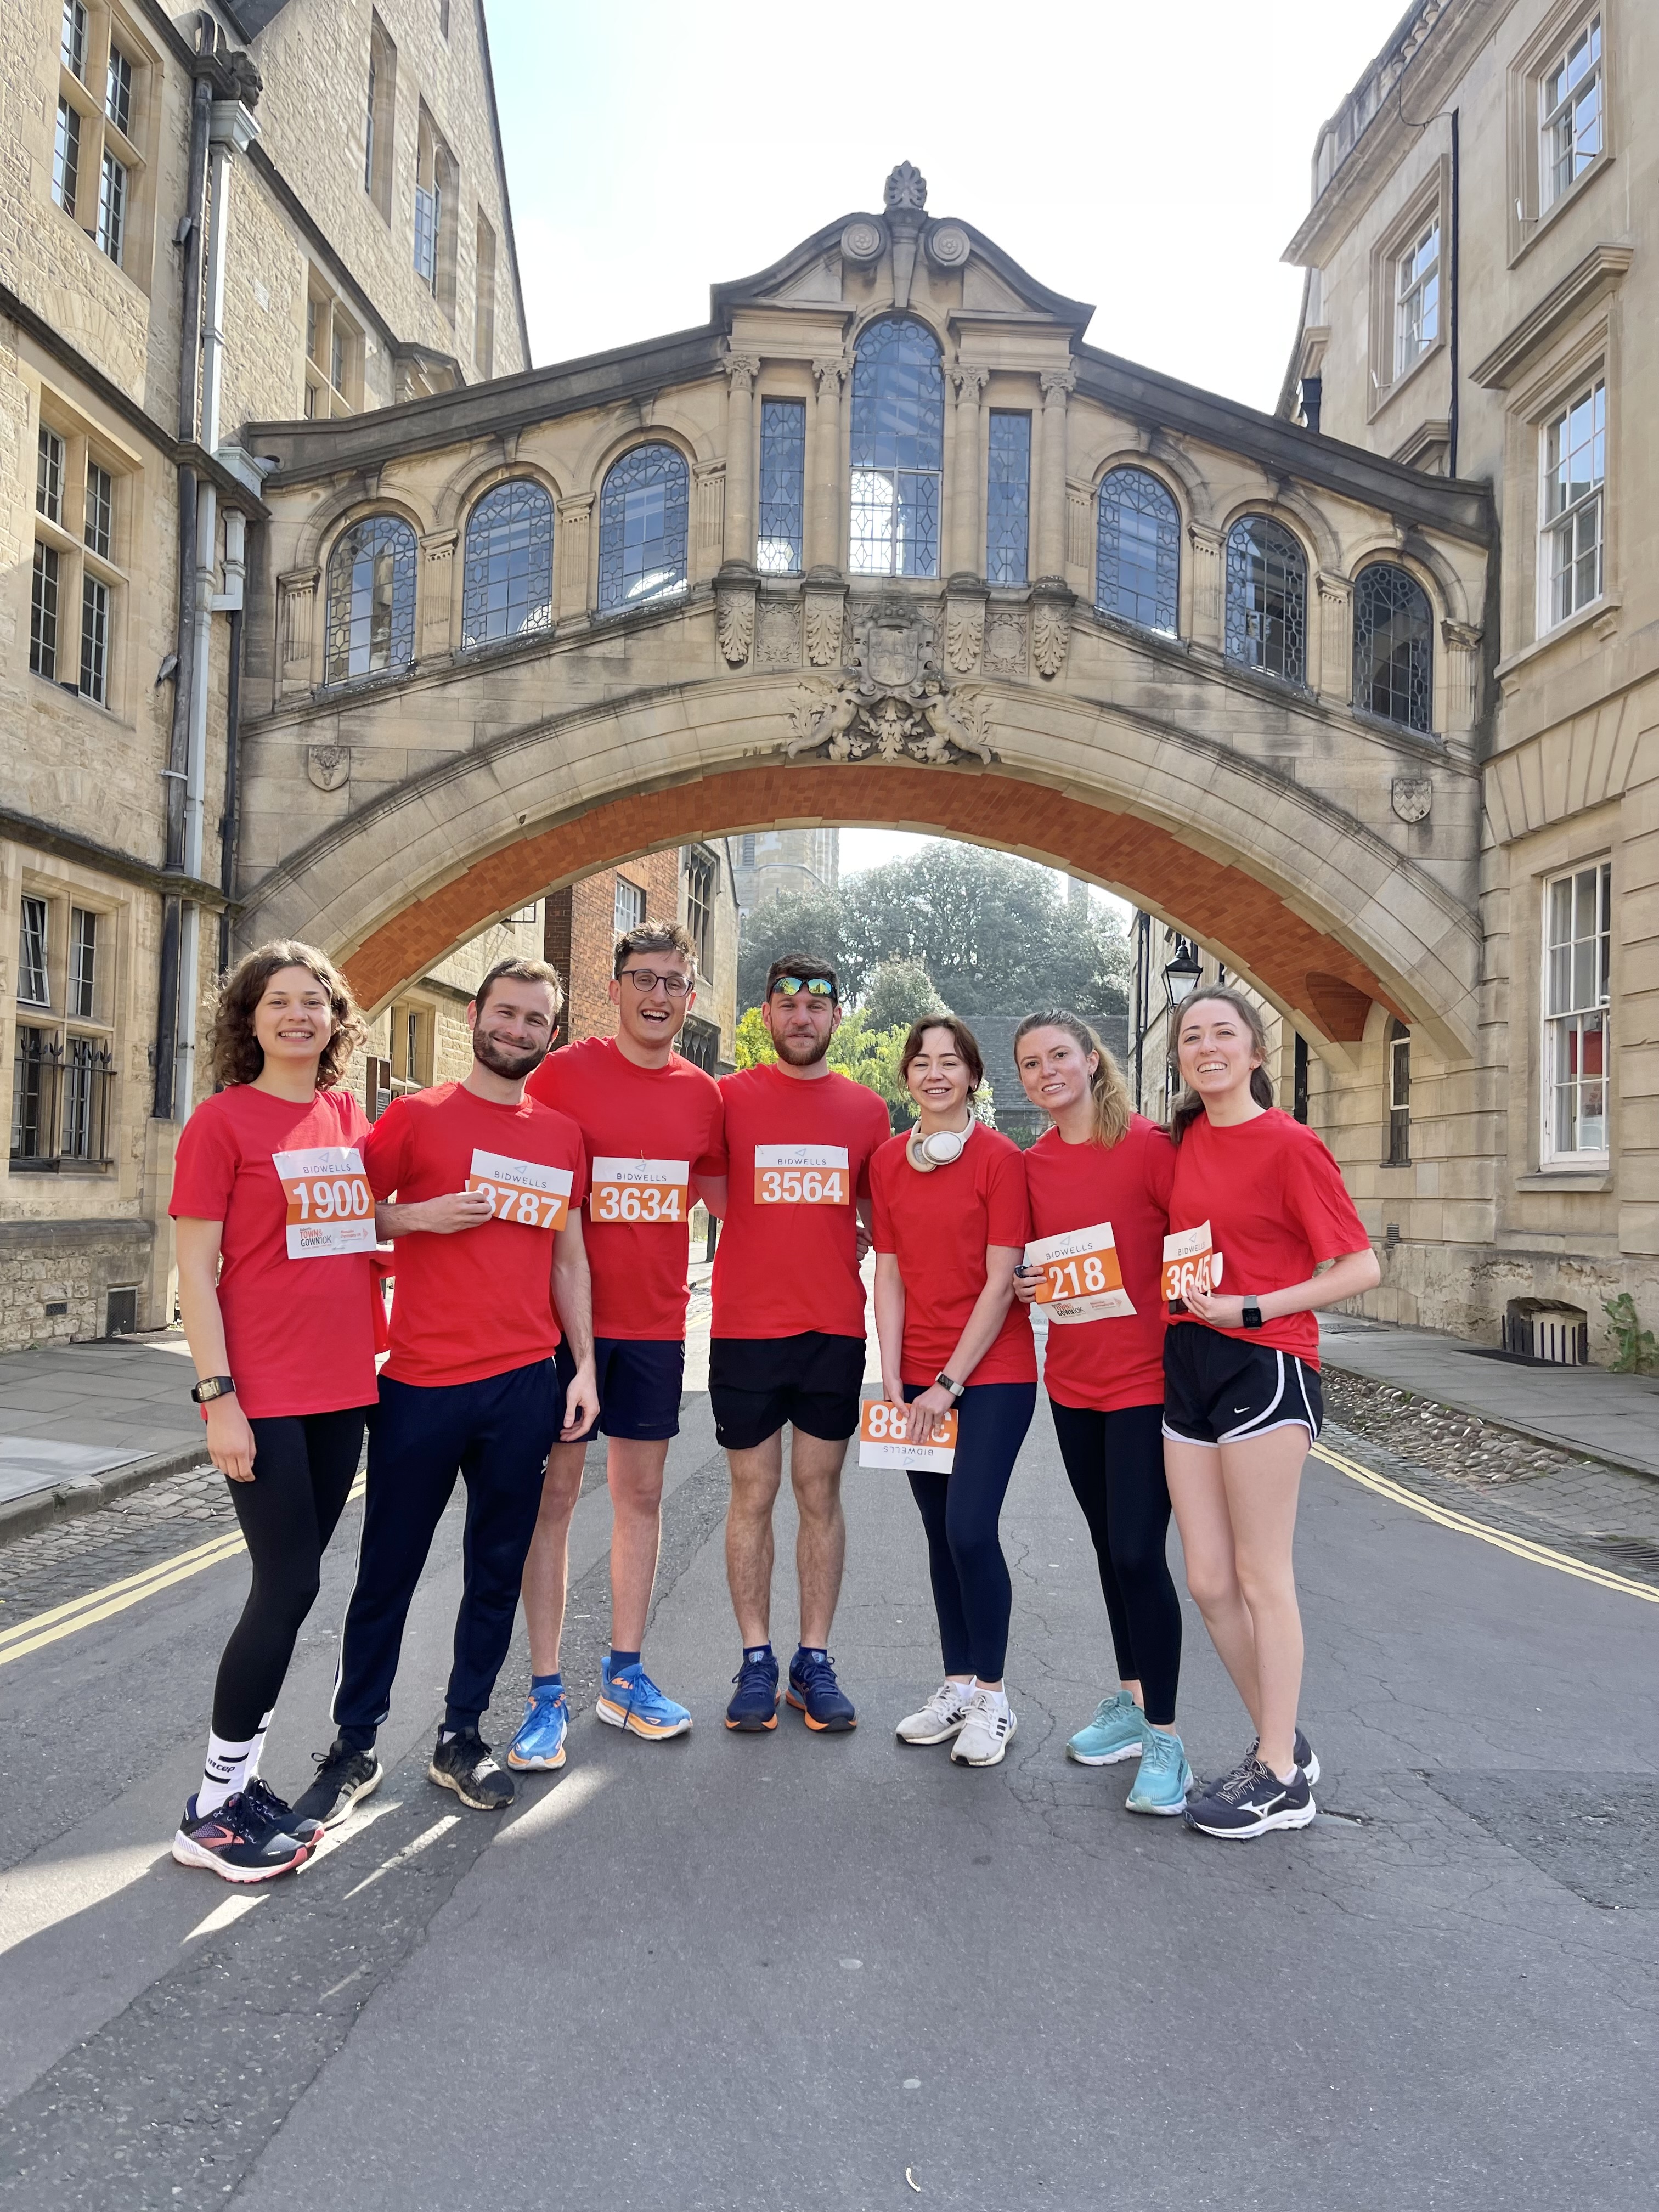 A group of students in red t-shirts standing underneath the Bridge of Sighs in Oxford on the day of the Town and Gown race